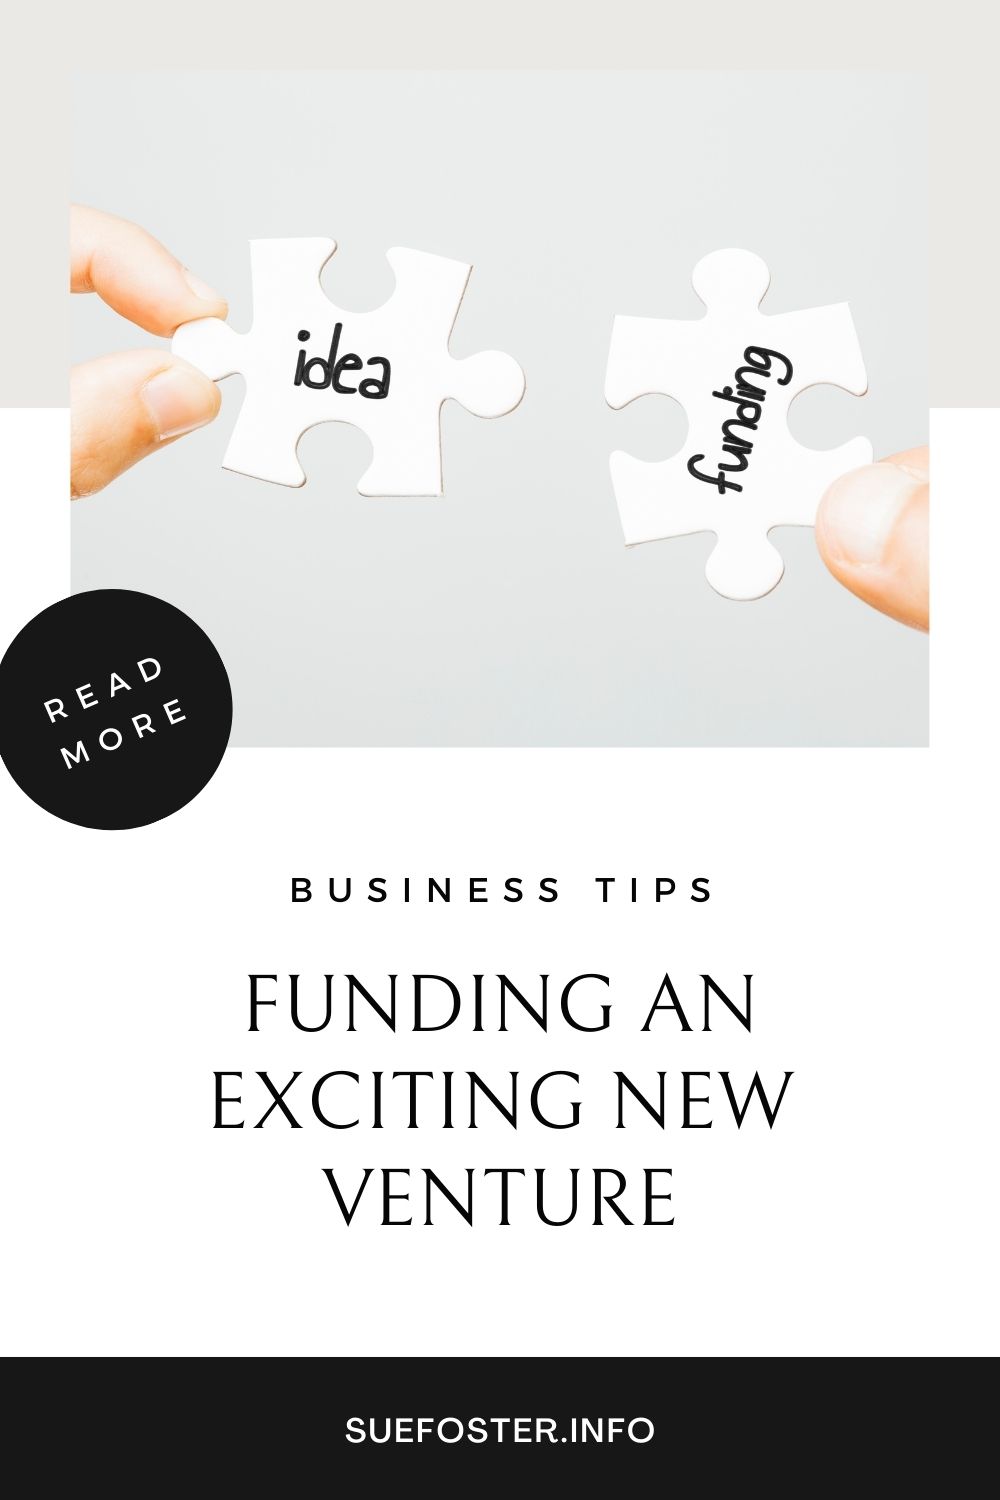 Explore Funding Options for Your New Venture: Loans, Grants, Investors & More! Get Started on Your Entrepreneurial Journey